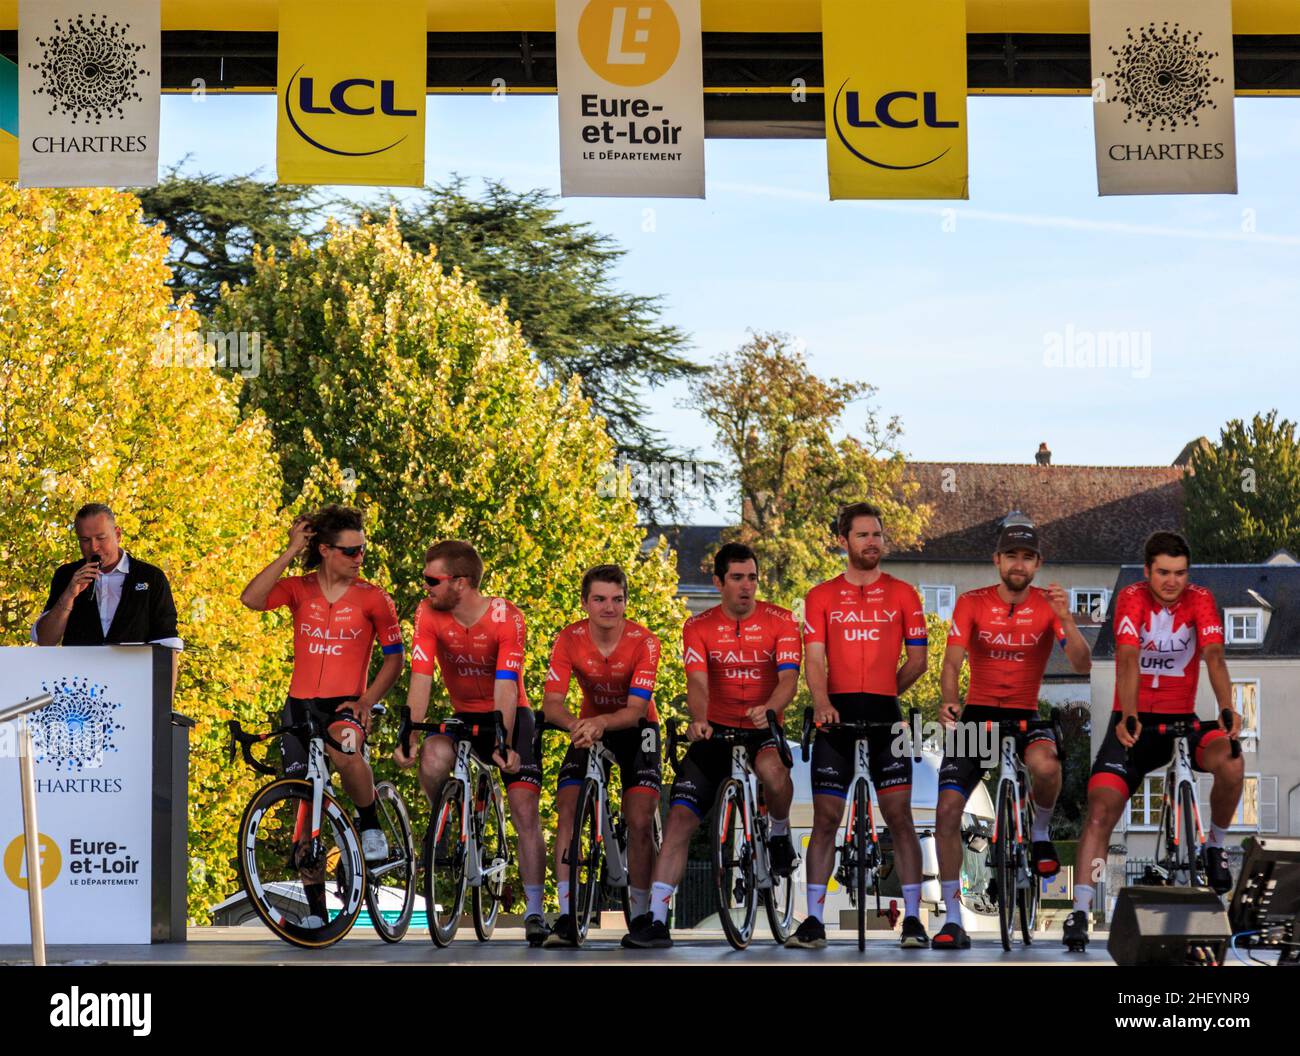 Chartres, France - October 13, 2019: Team Rally UHC Cycling is on the podium in Chartres, during the teams presentation before the autumn French cycli Stock Photo